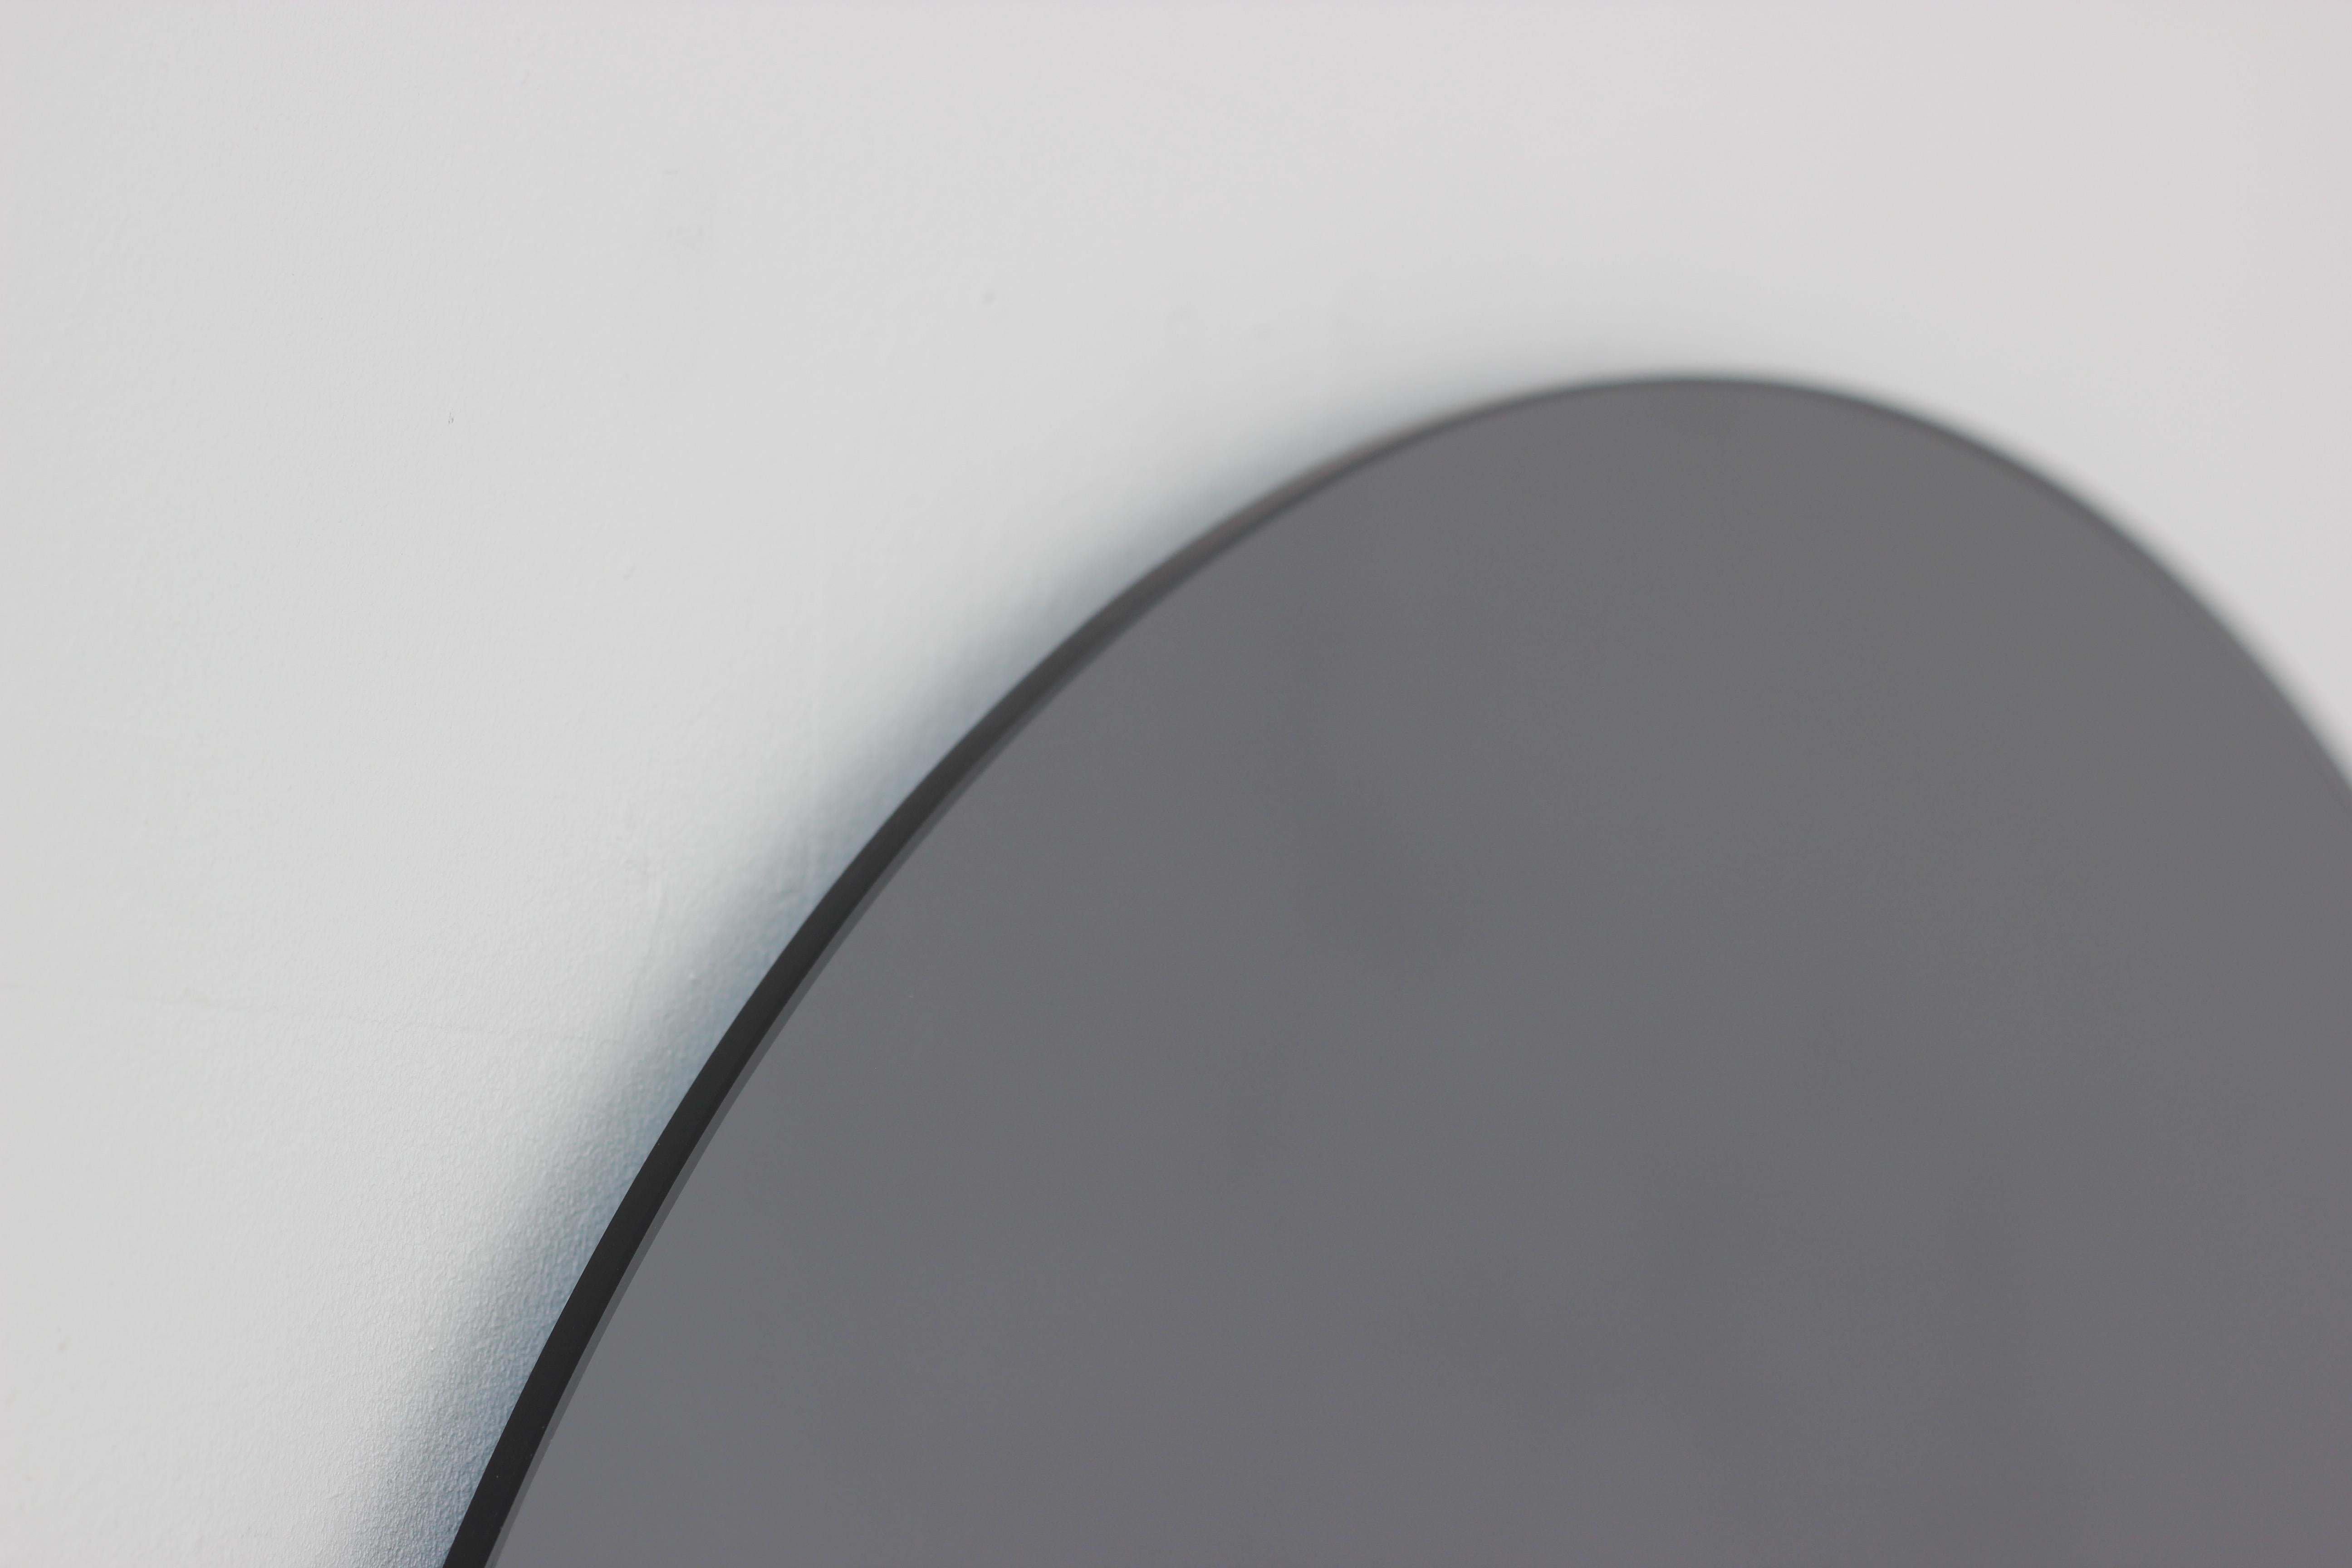 Orbis Black Tinted Round Frameless Contemporary Mirror, Small In New Condition For Sale In London, GB